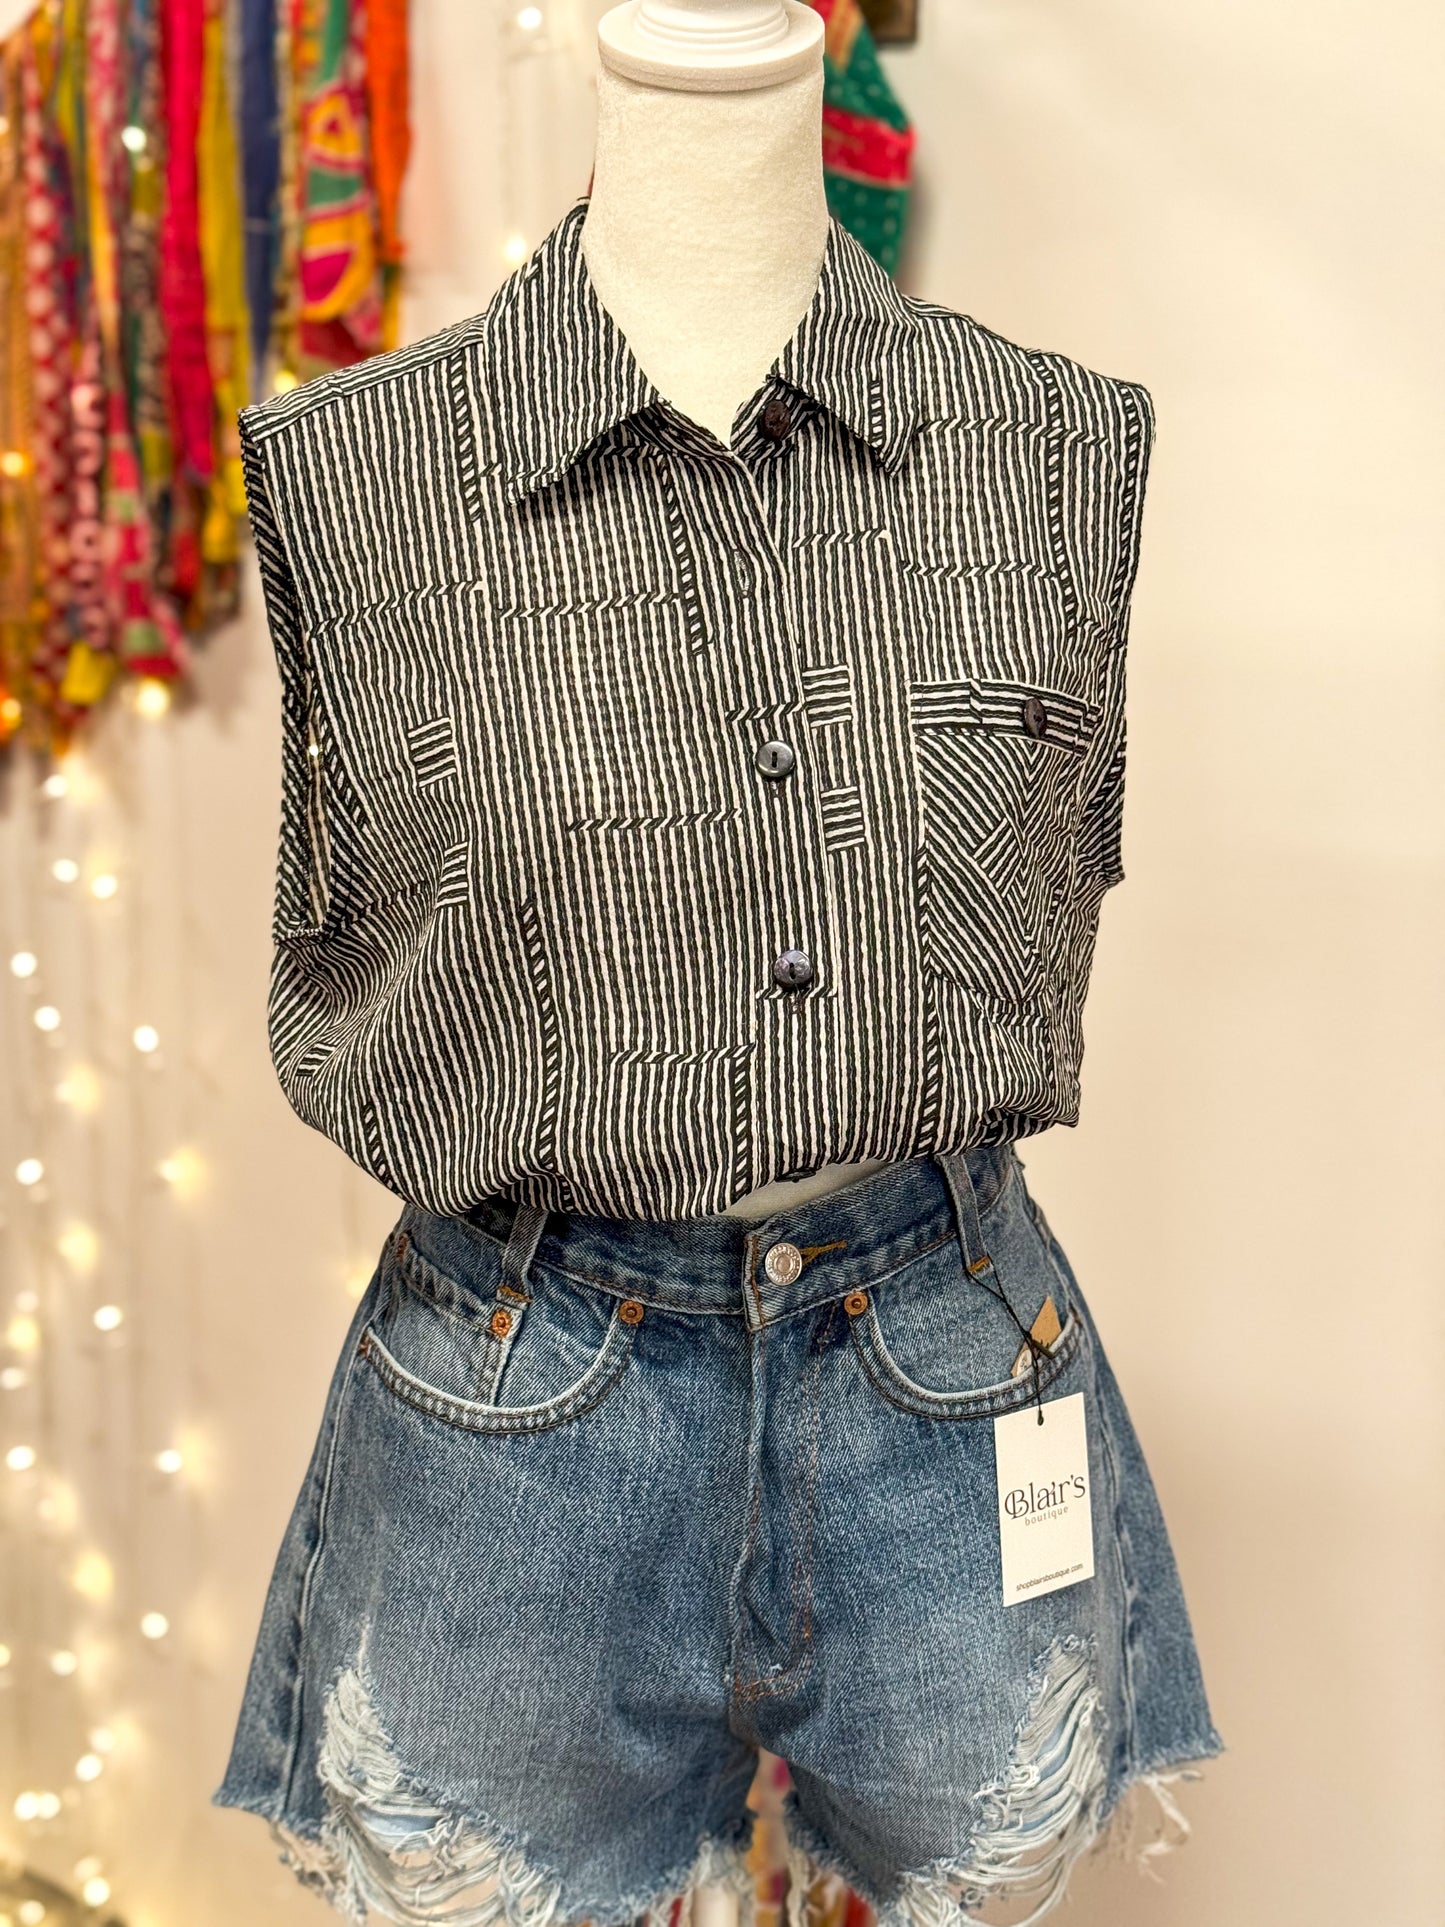 Upcycled Top - Sleeveless Button-Up Blouse - Cinched Waist